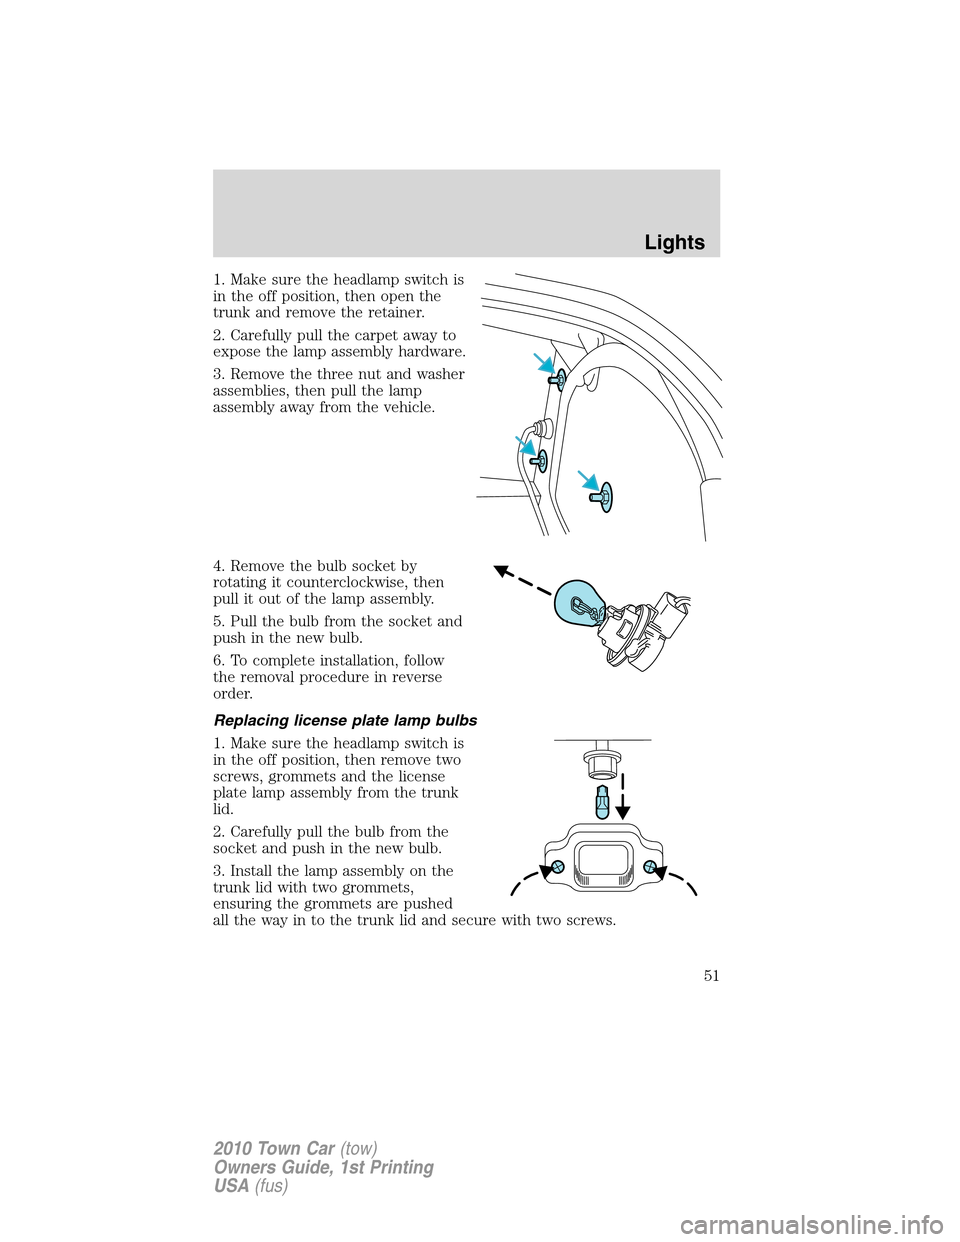 LINCOLN TOWN CAR 2010  Owners Manual 1. Make sure the headlamp switch is
in the off position, then open the
trunk and remove the retainer.
2. Carefully pull the carpet away to
expose the lamp assembly hardware.
3. Remove the three nut an